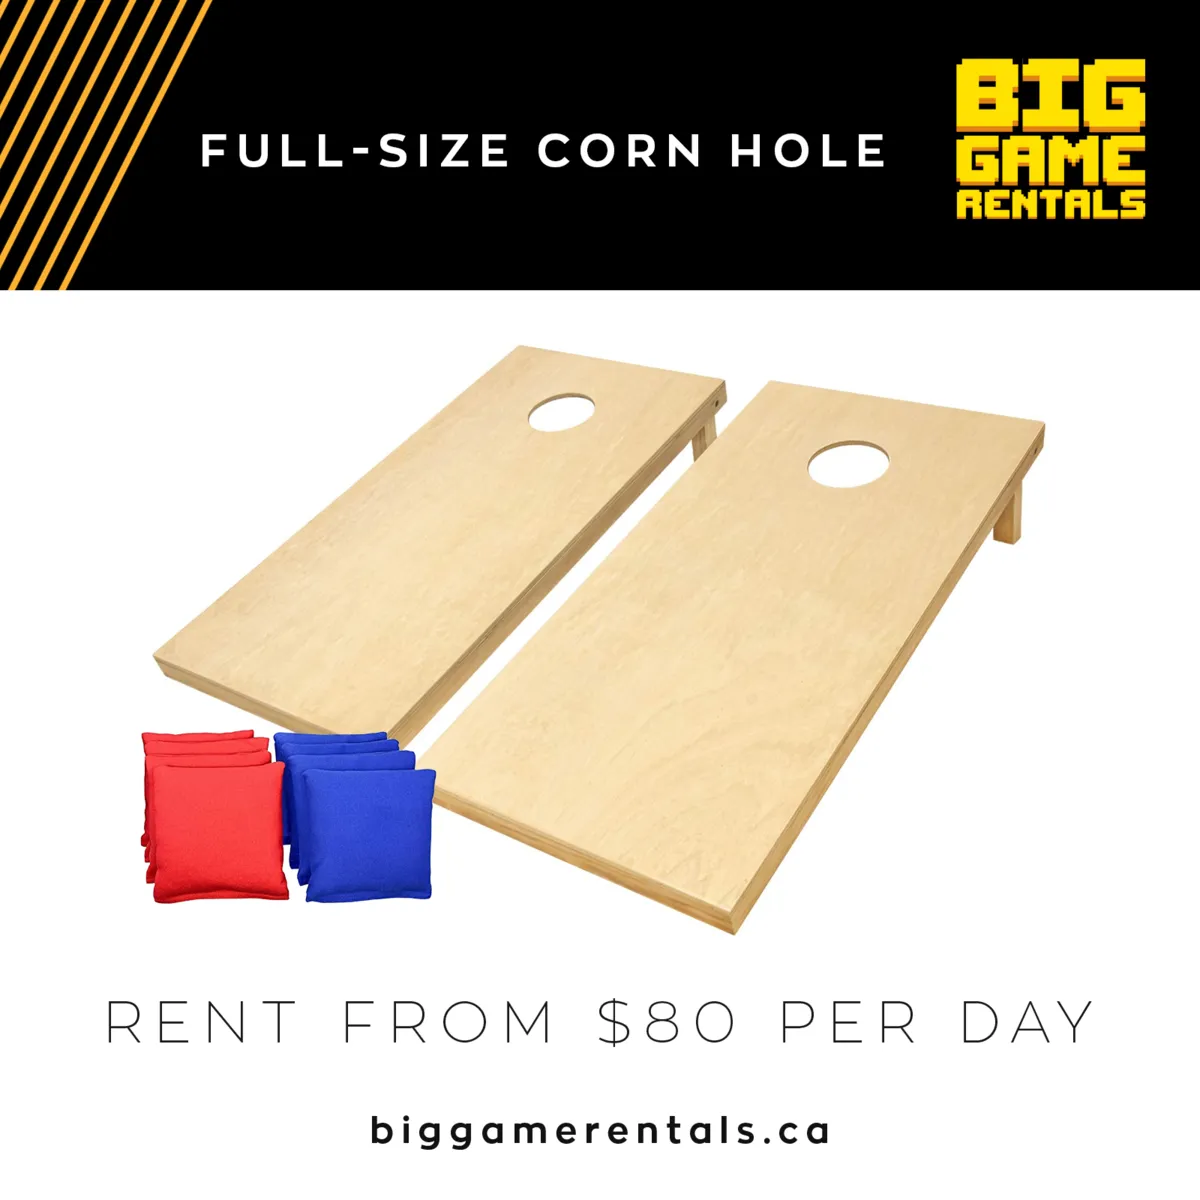 Corn Hole Gaame 4 for Rent